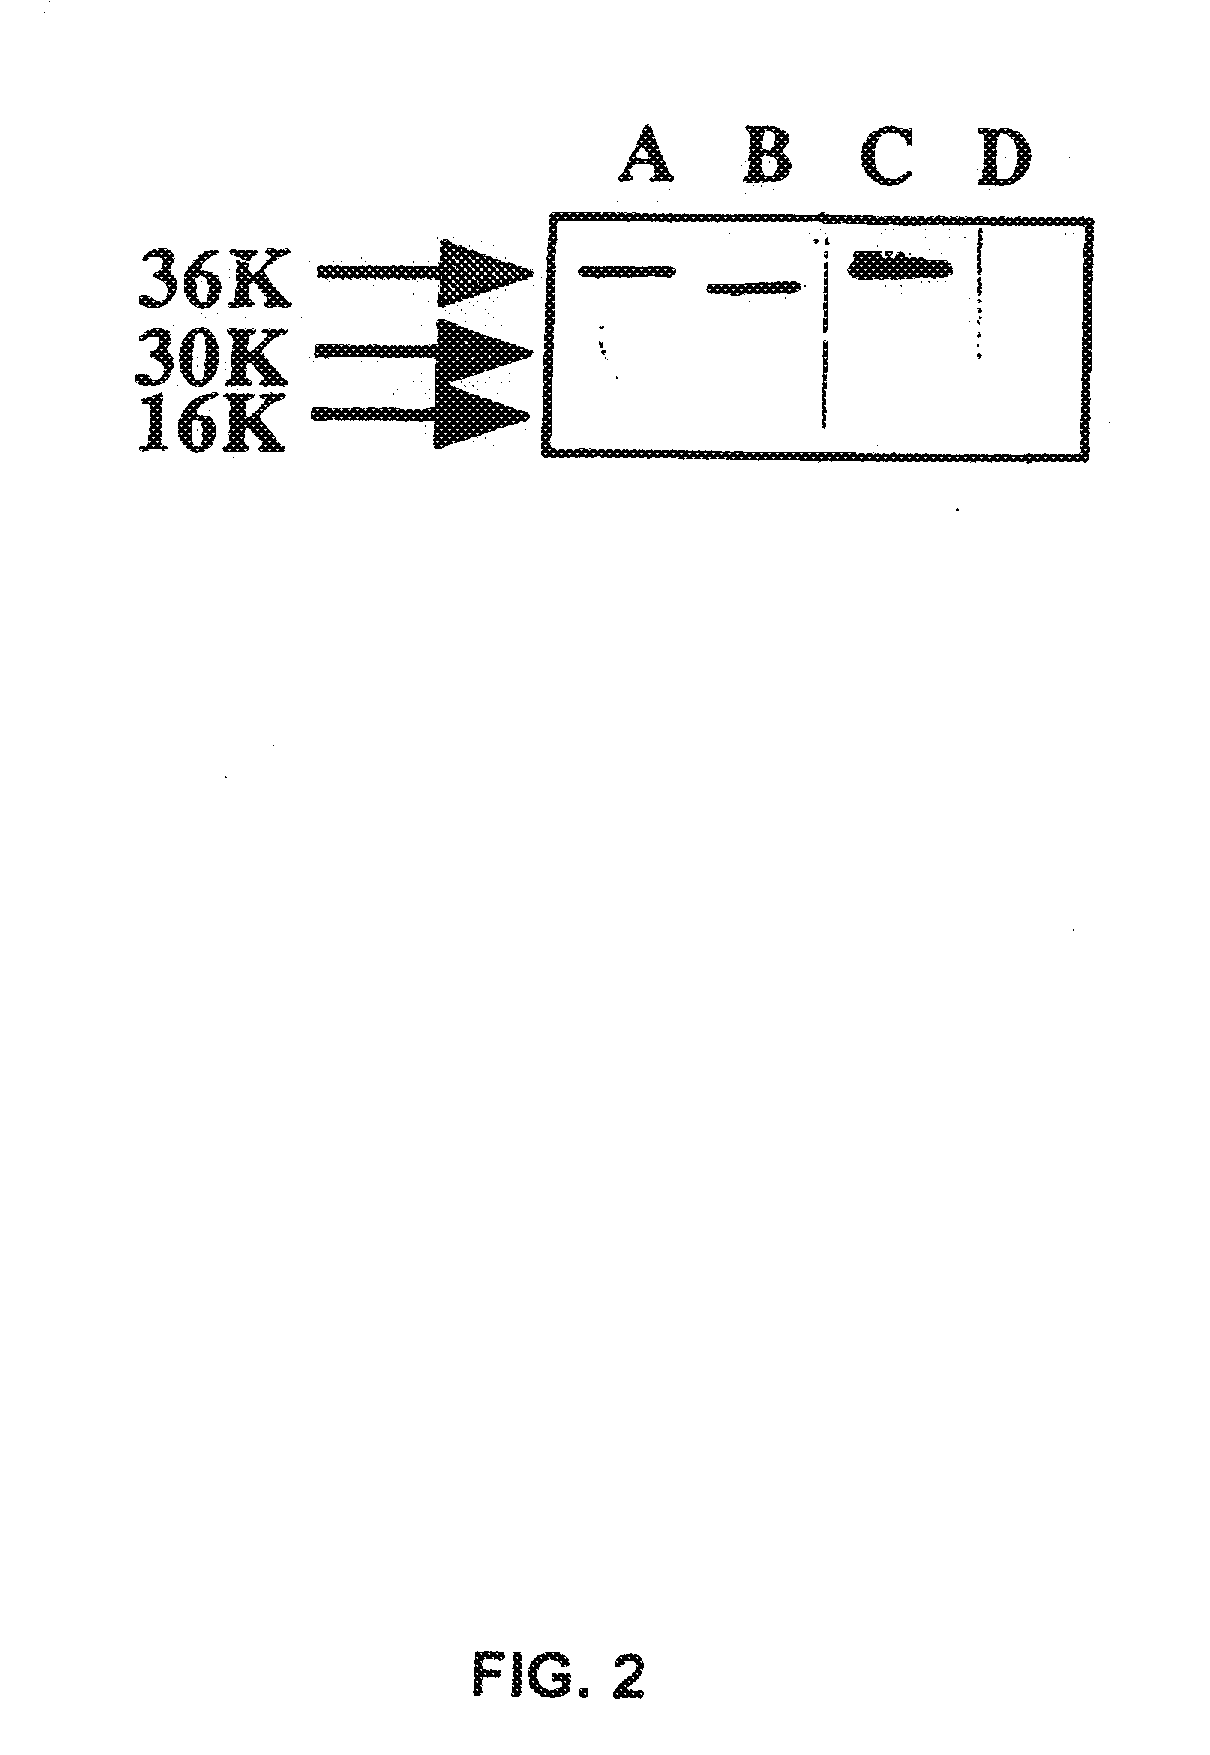 Substance p-saporin (sp-sap) conjugates and methods of use